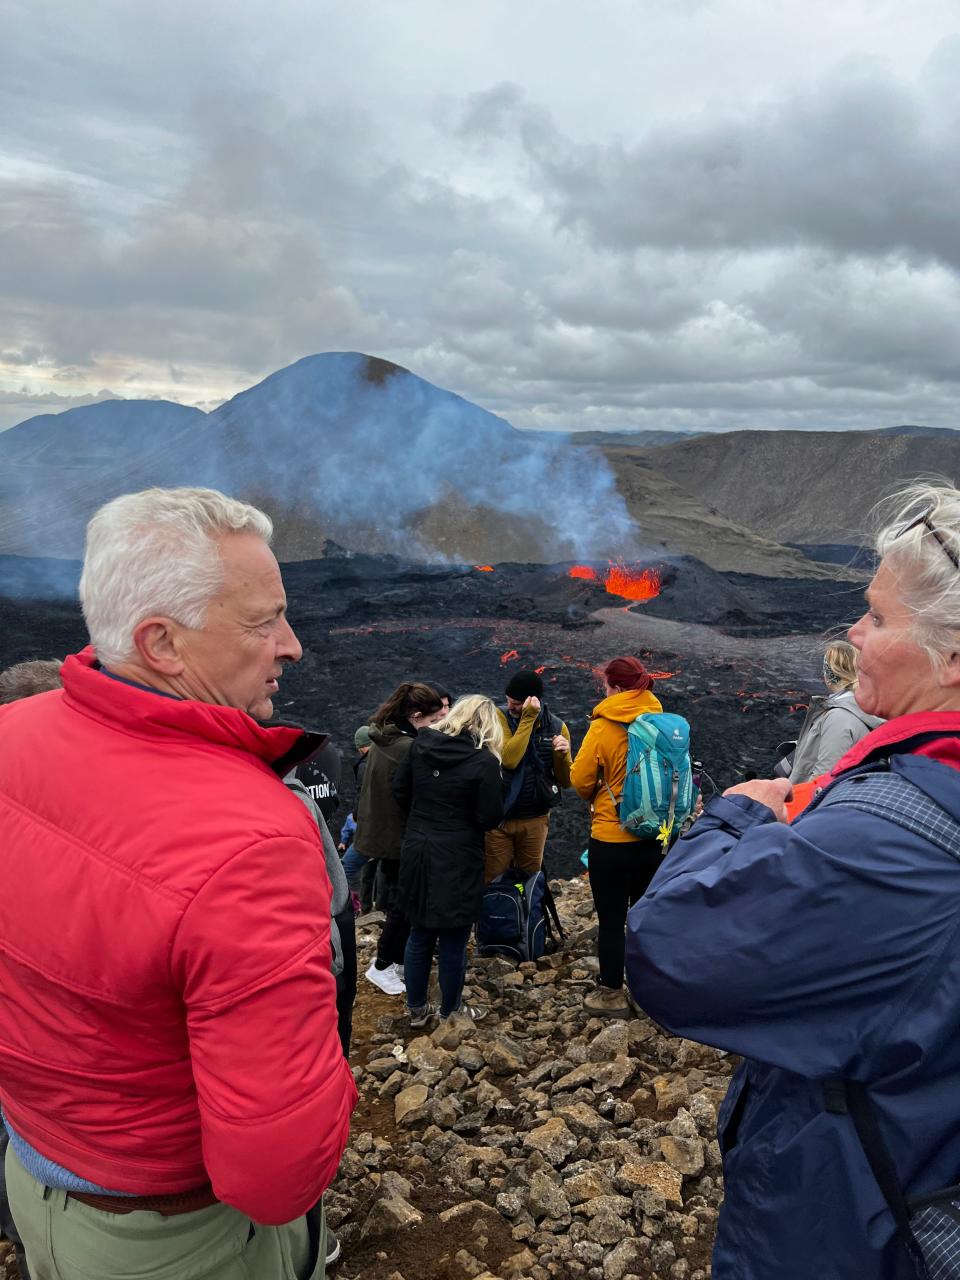 Sigurdur Leosson visits a volcano, which is seen in the background